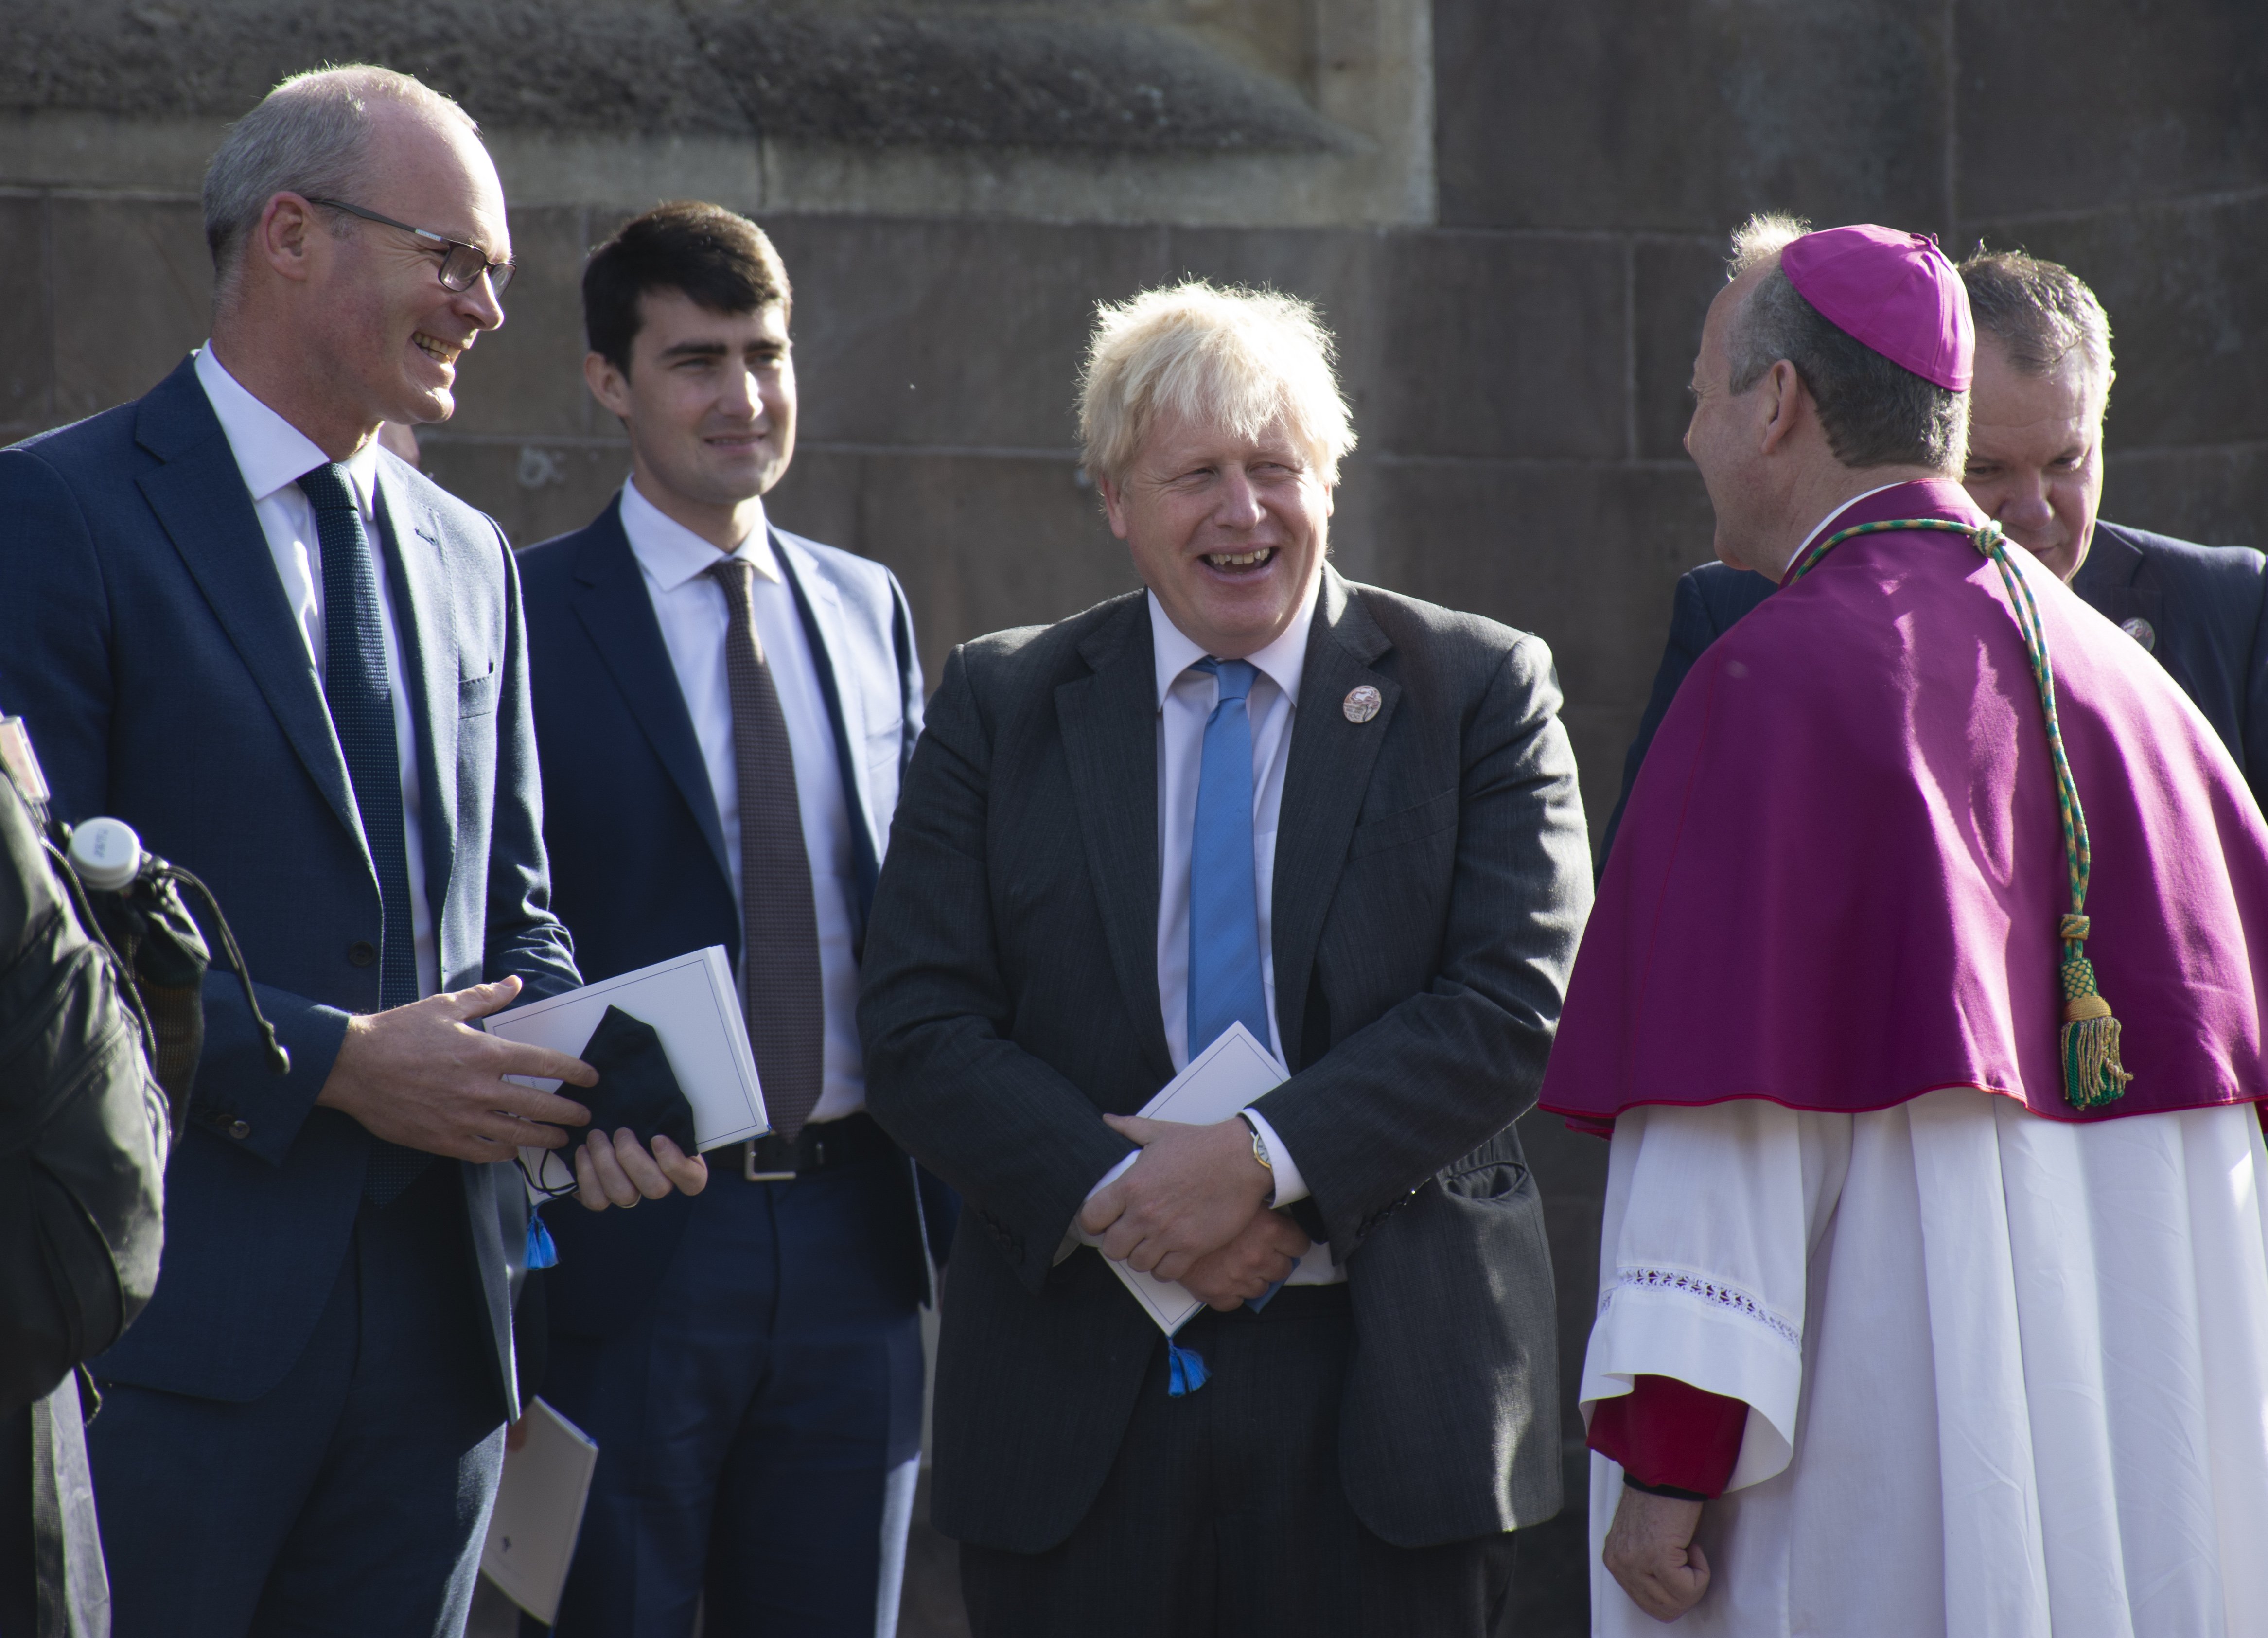 Archbishop Eamon Martin of Armagh, Northern Ireland, speaks with Irish Foreign Affairs Minister Simon Coveney, far left, and British Prime Minister Boris Johnson following a service to mark the centenary of the partition of Ireland in Armagh Oct. 21, 2021